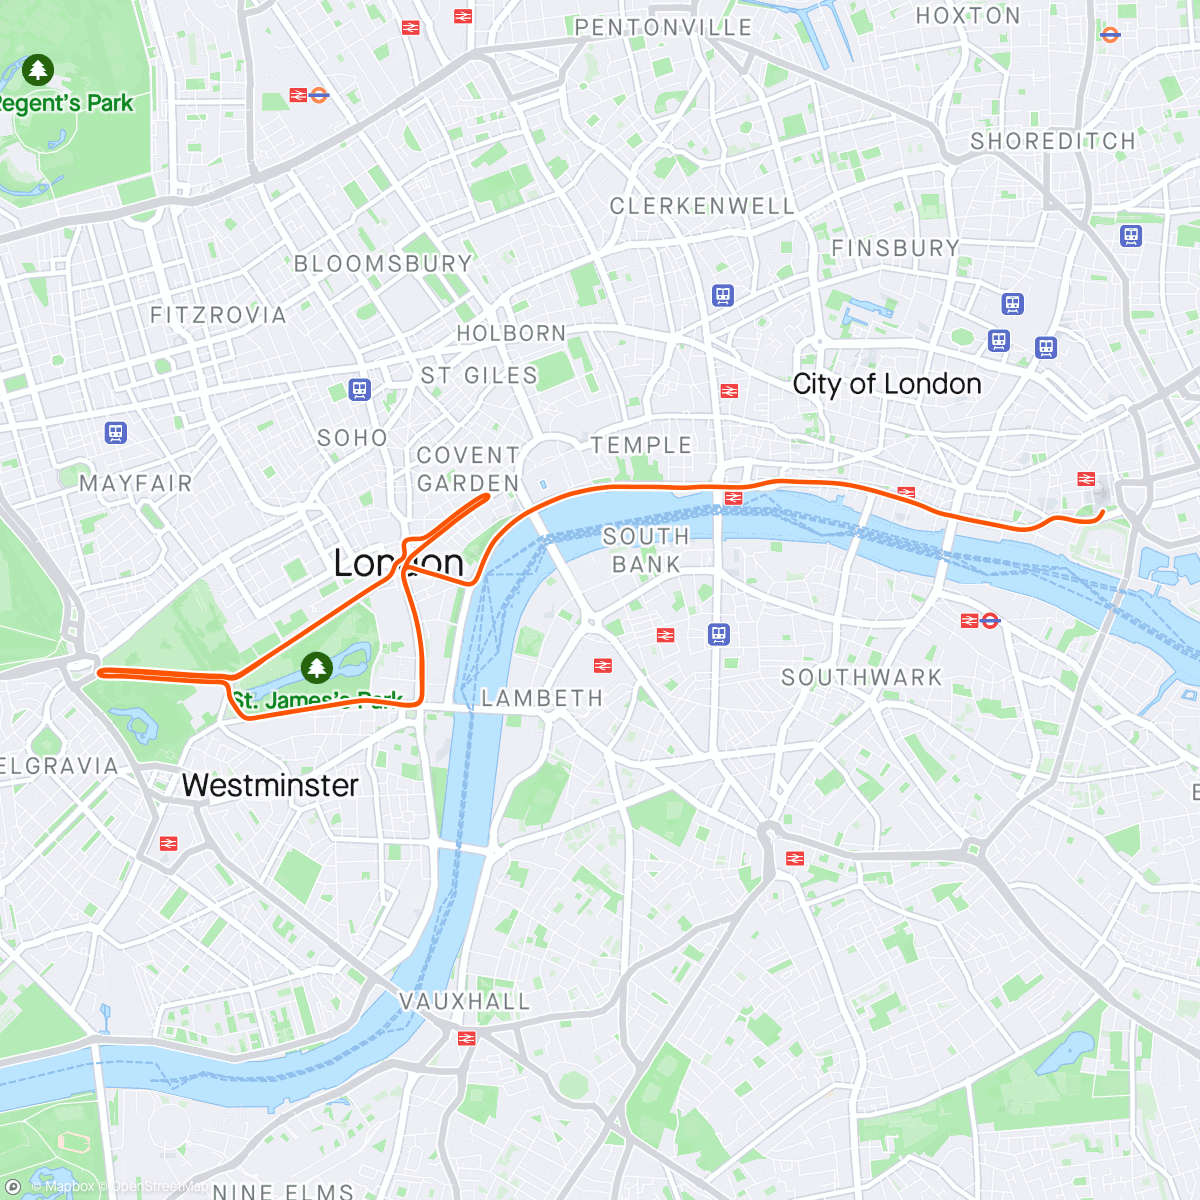 「Zwift - Race: Stage 3: Bag That Badge - London Classique Reverse (C) on Classique Reverse in London」活動的地圖